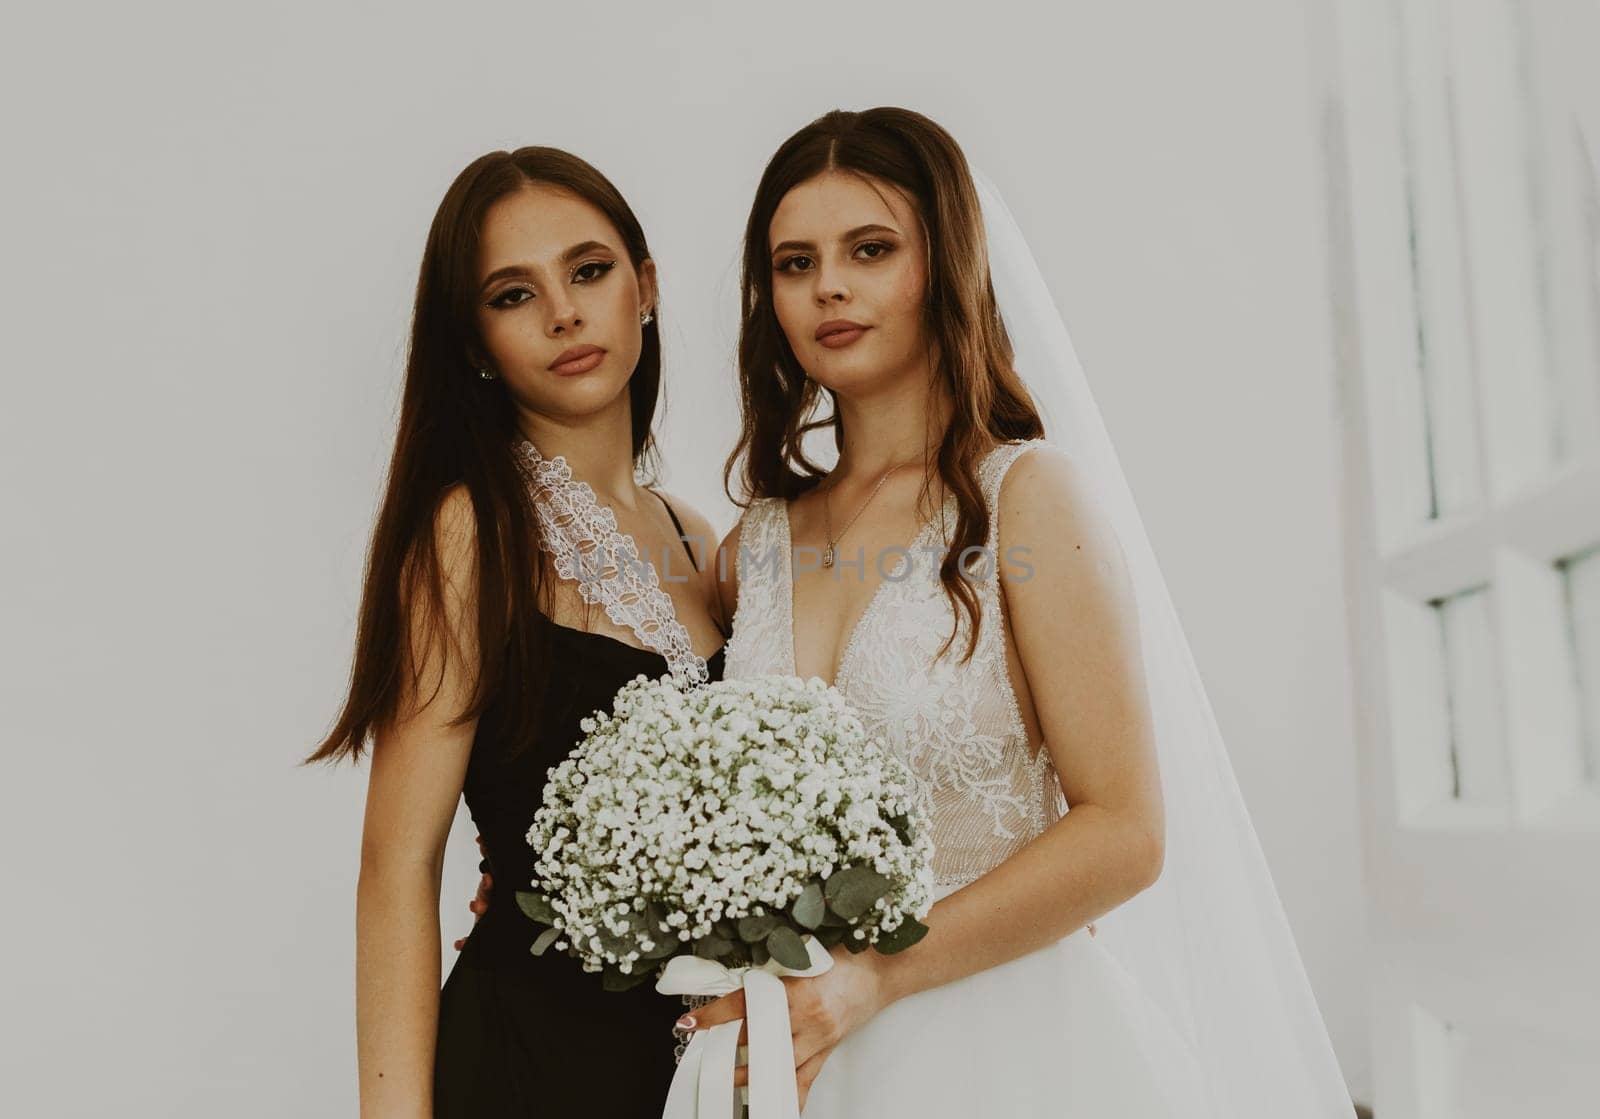 Portrait of a beautiful young Caucasian bride in a white dress with a wedding bouquet of white boutonnieres stands in an embrace with her bridesmaid, side view, close-up.